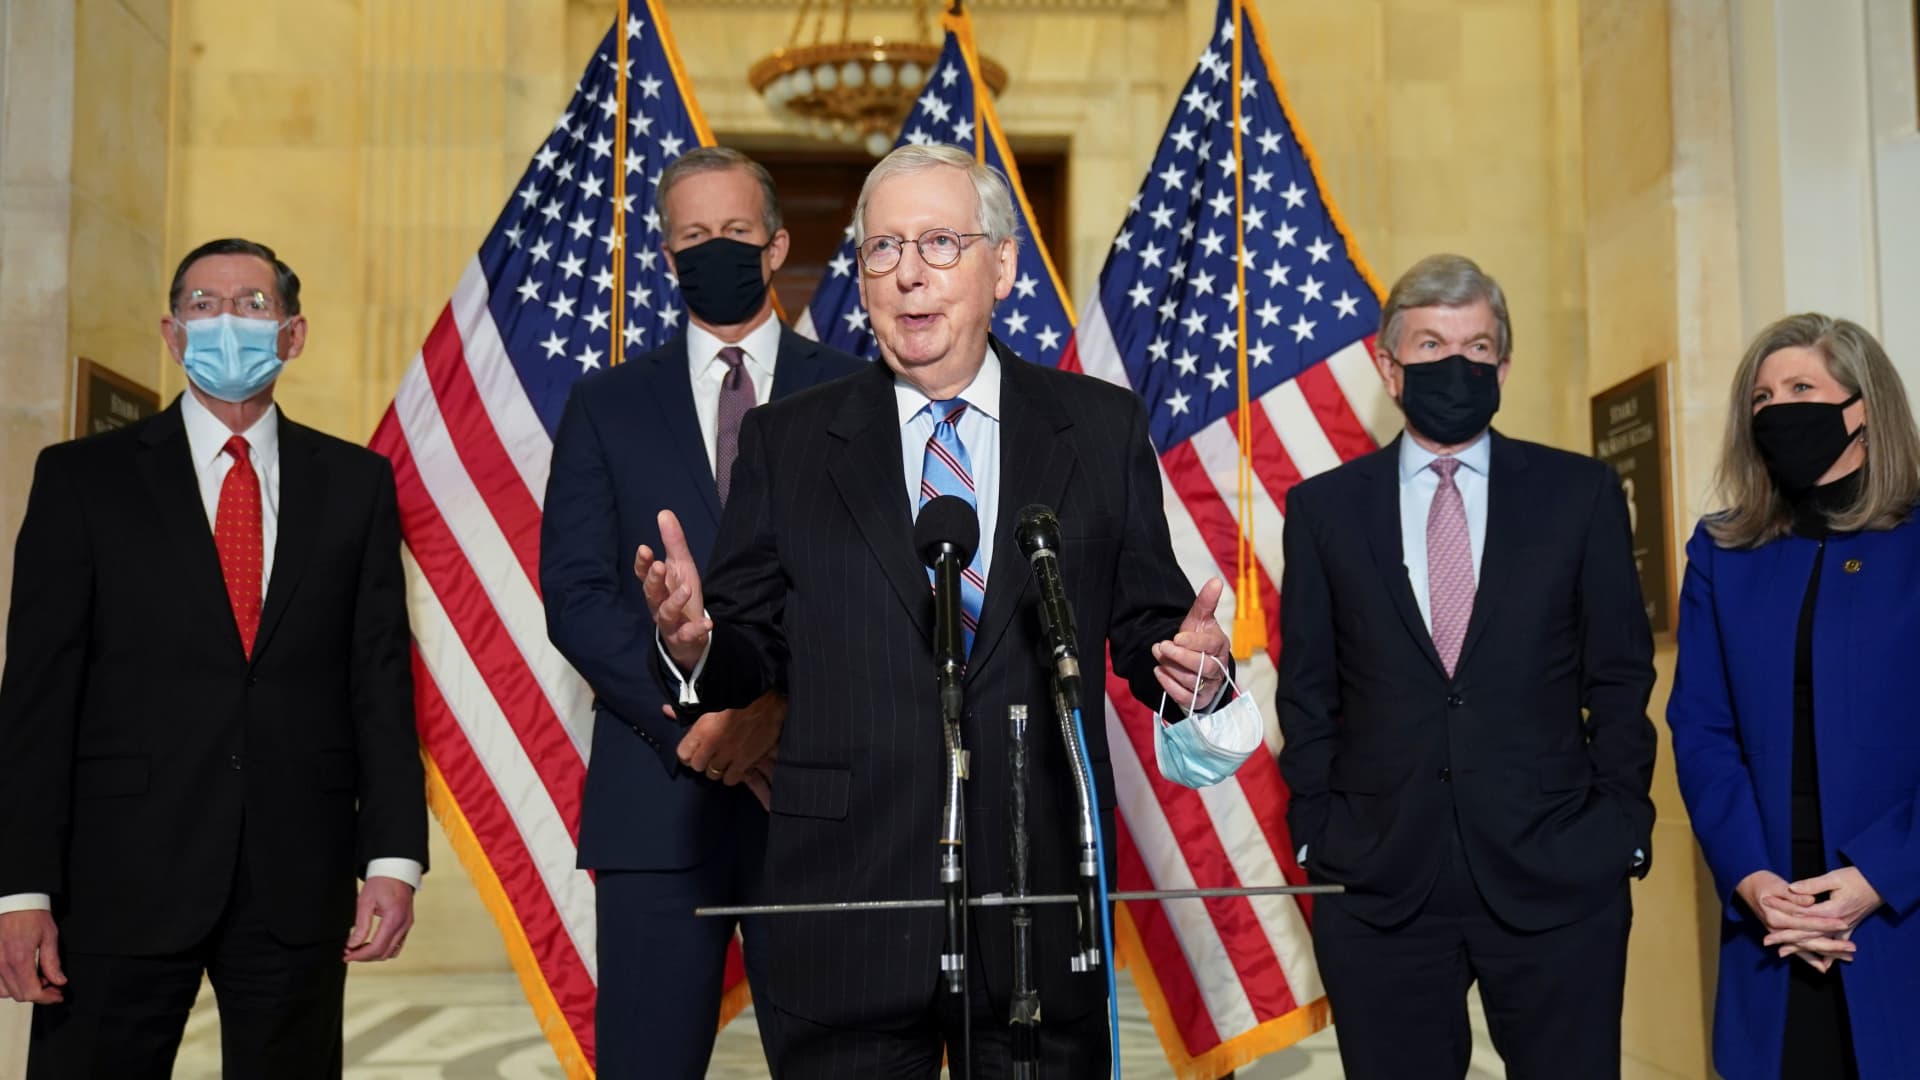 Senate Minority Leader Mitch McConnell speaks to reporters after the Republican weekly policy lunch on Capitol Hill in Washington, U.S., February 23, 2021.